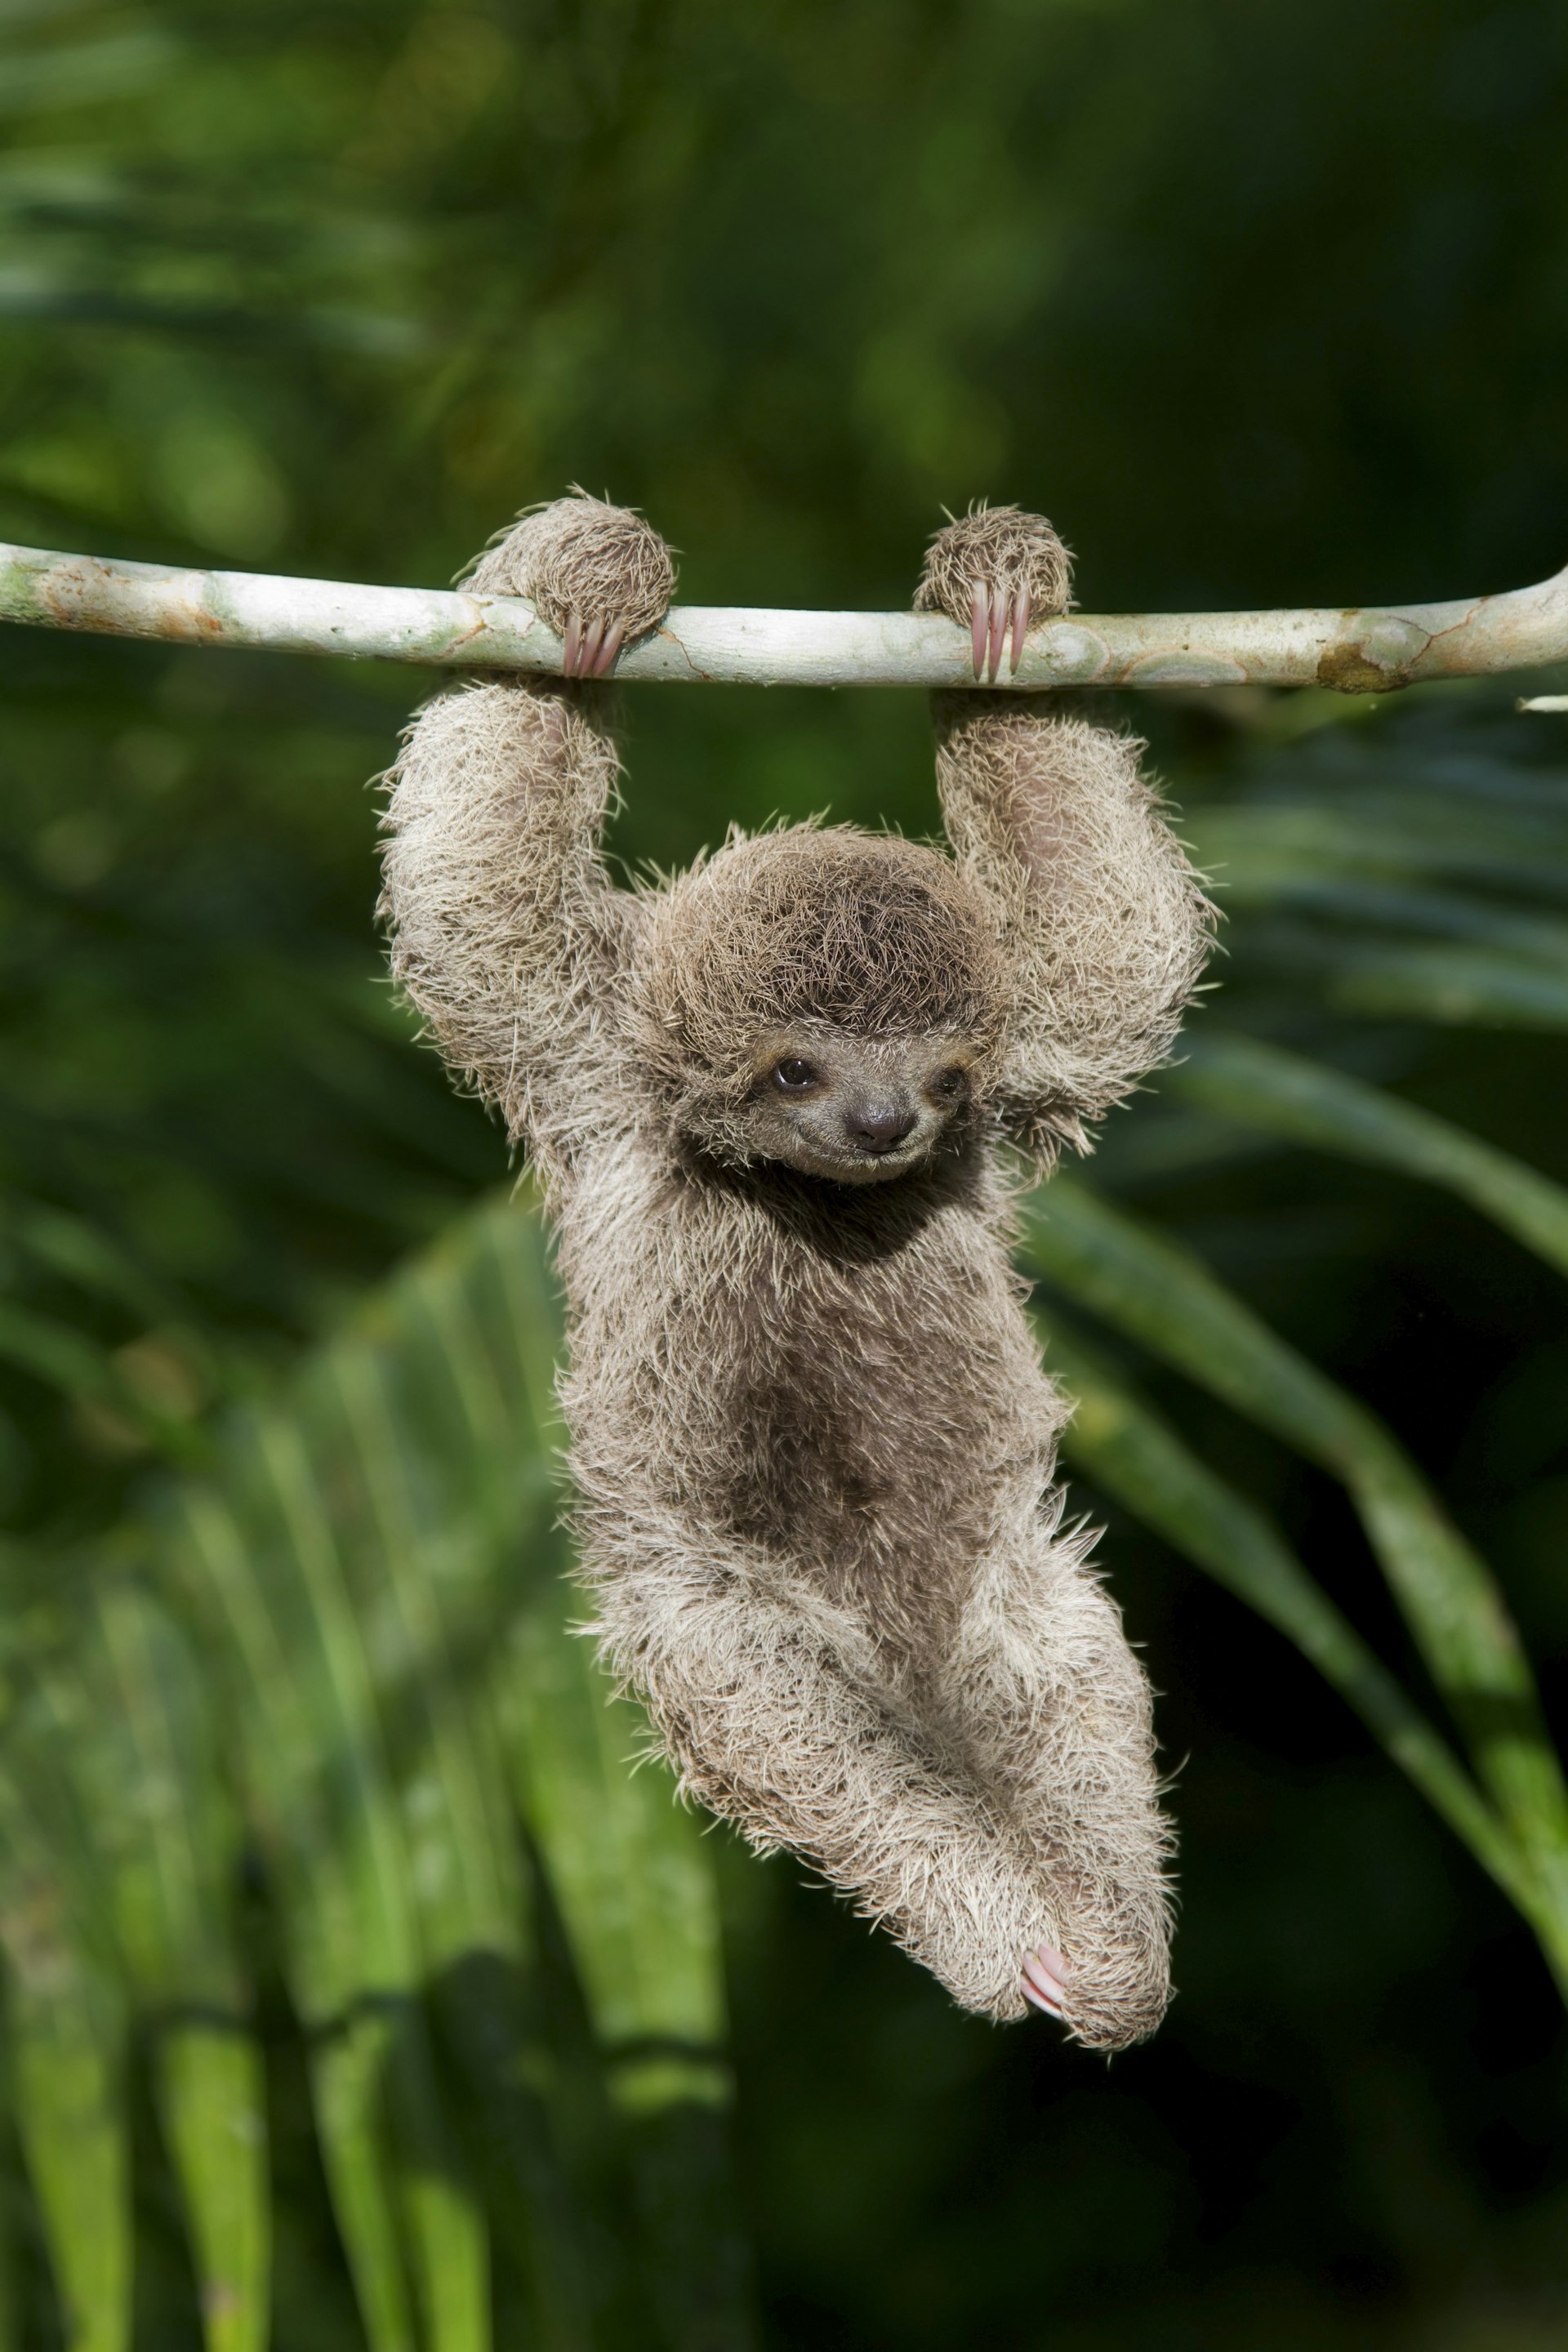 A baby three-toed sloth in Costa Rica Rainforest. 